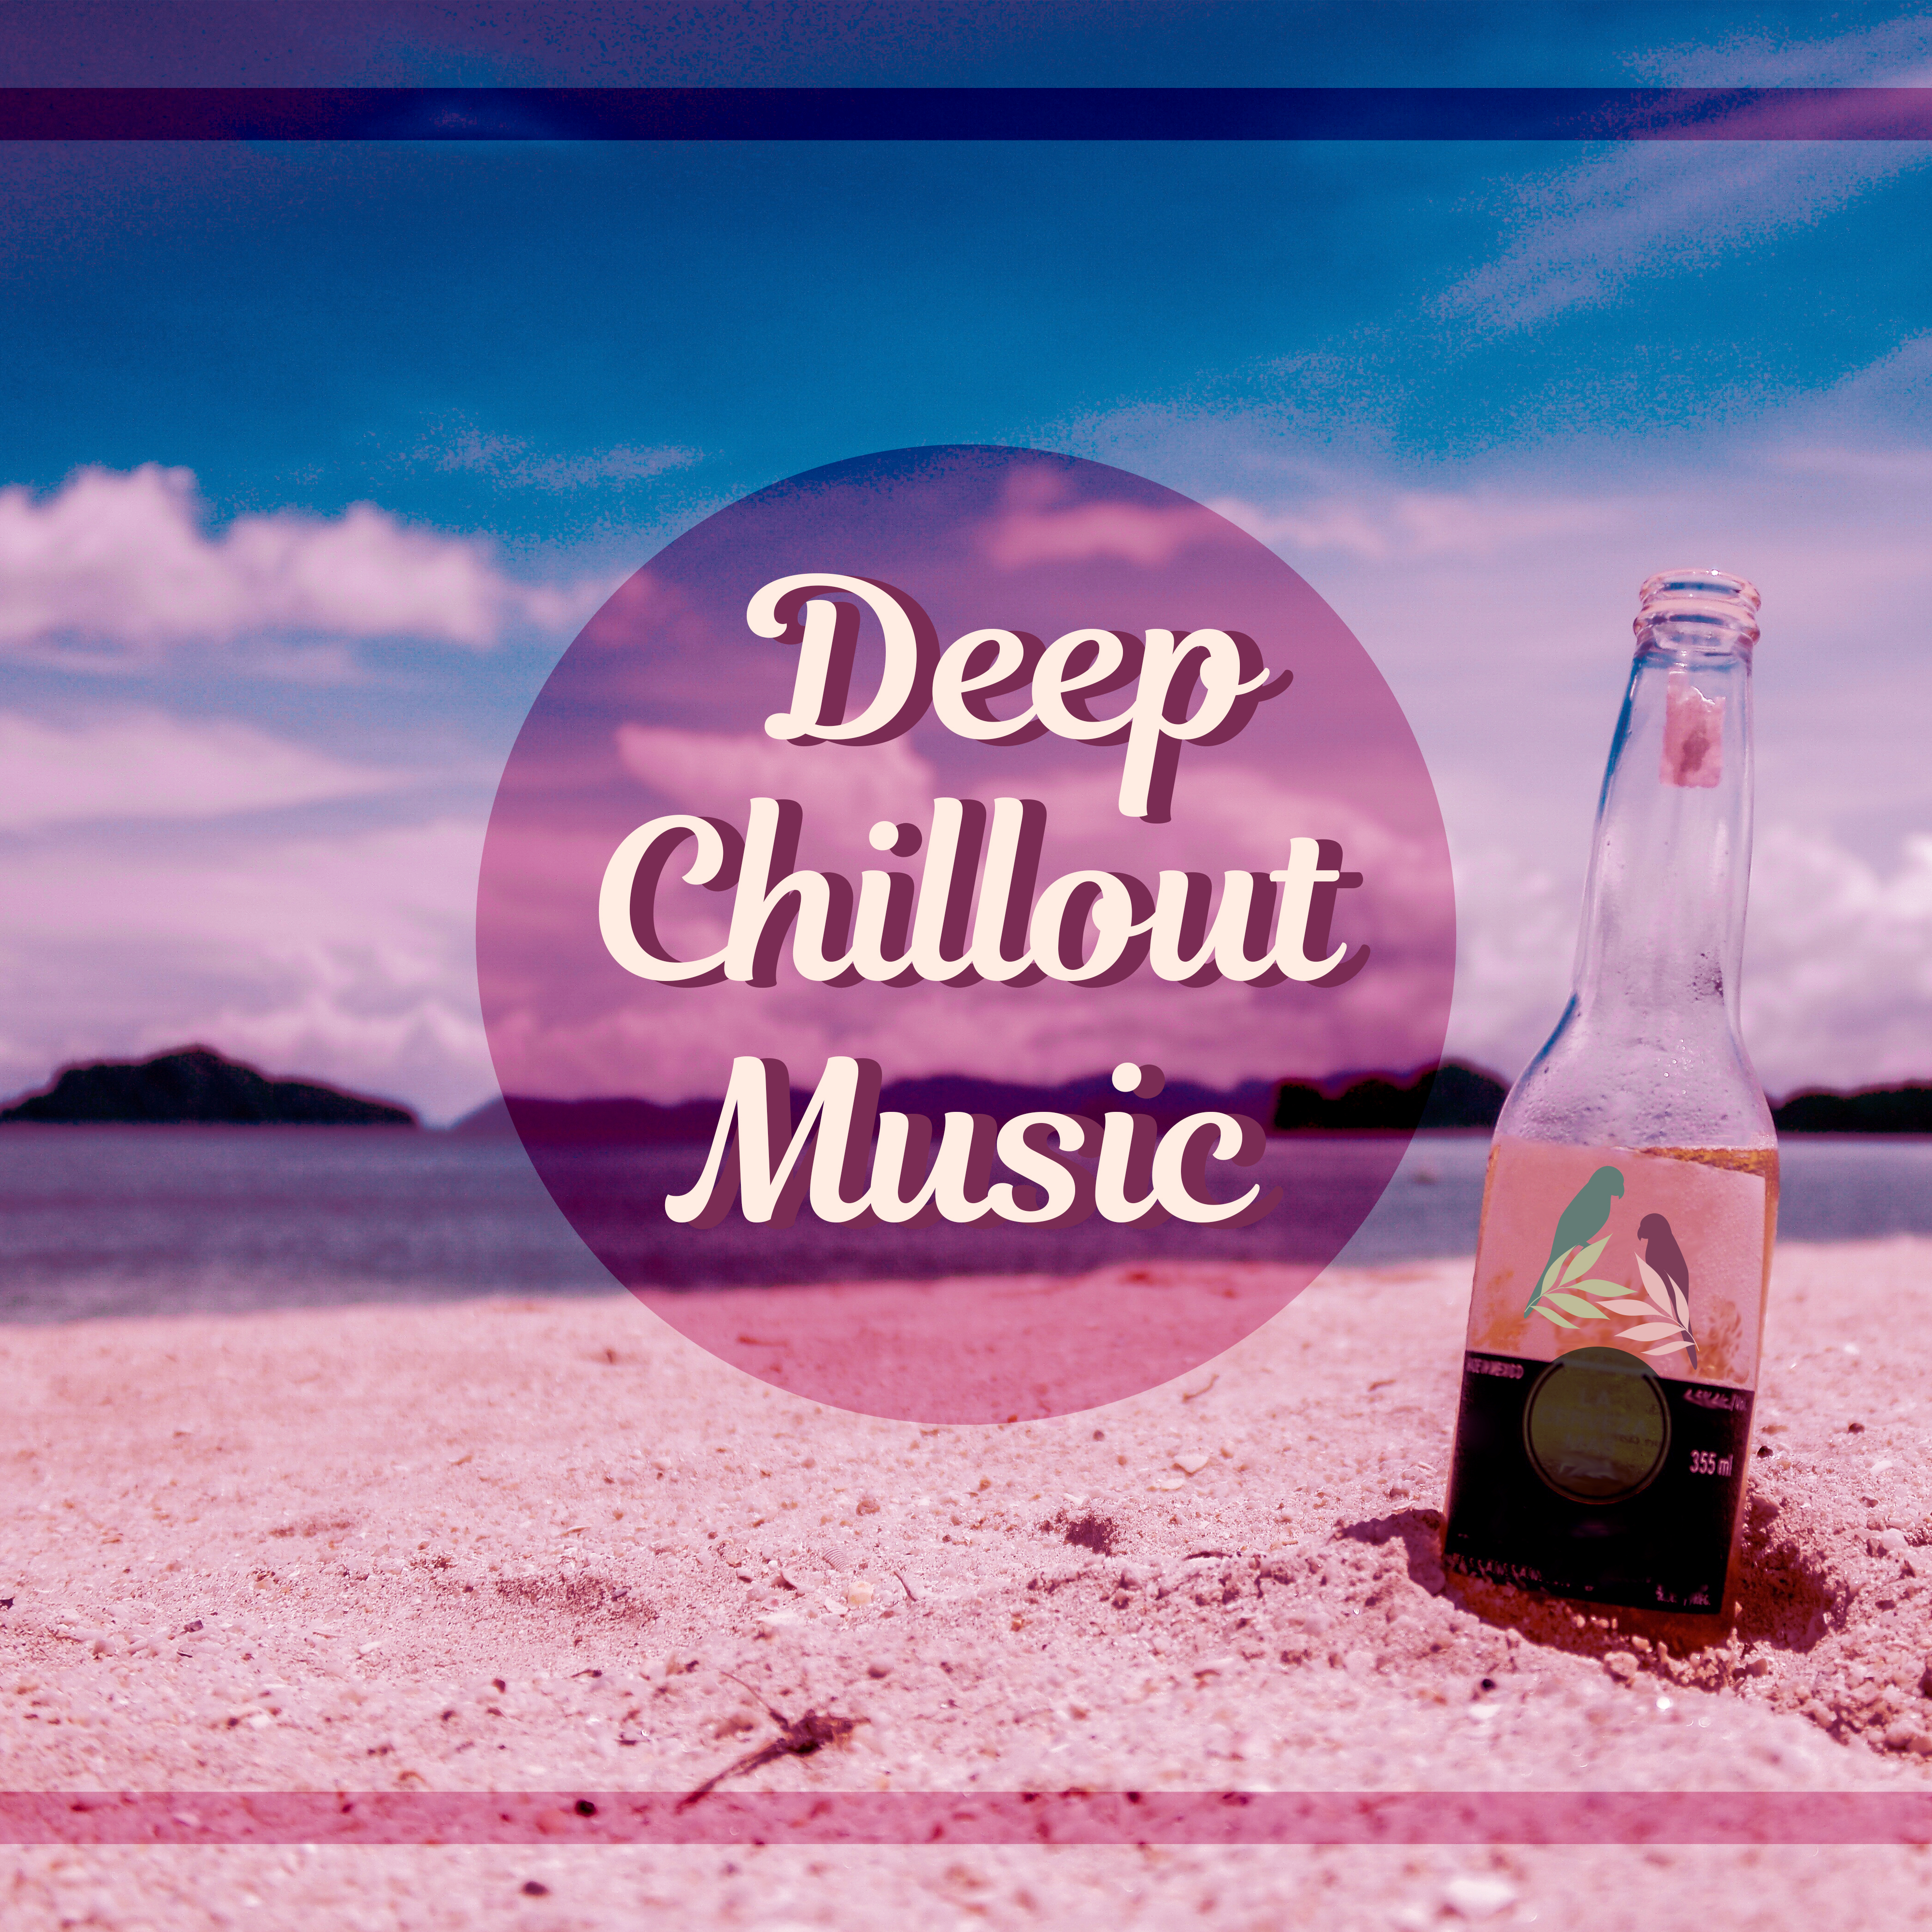 Deep Chillout Music – Relaxation Sounds, Ocean Waves, Ibiza Lounge, Summertime, Beach Melodies